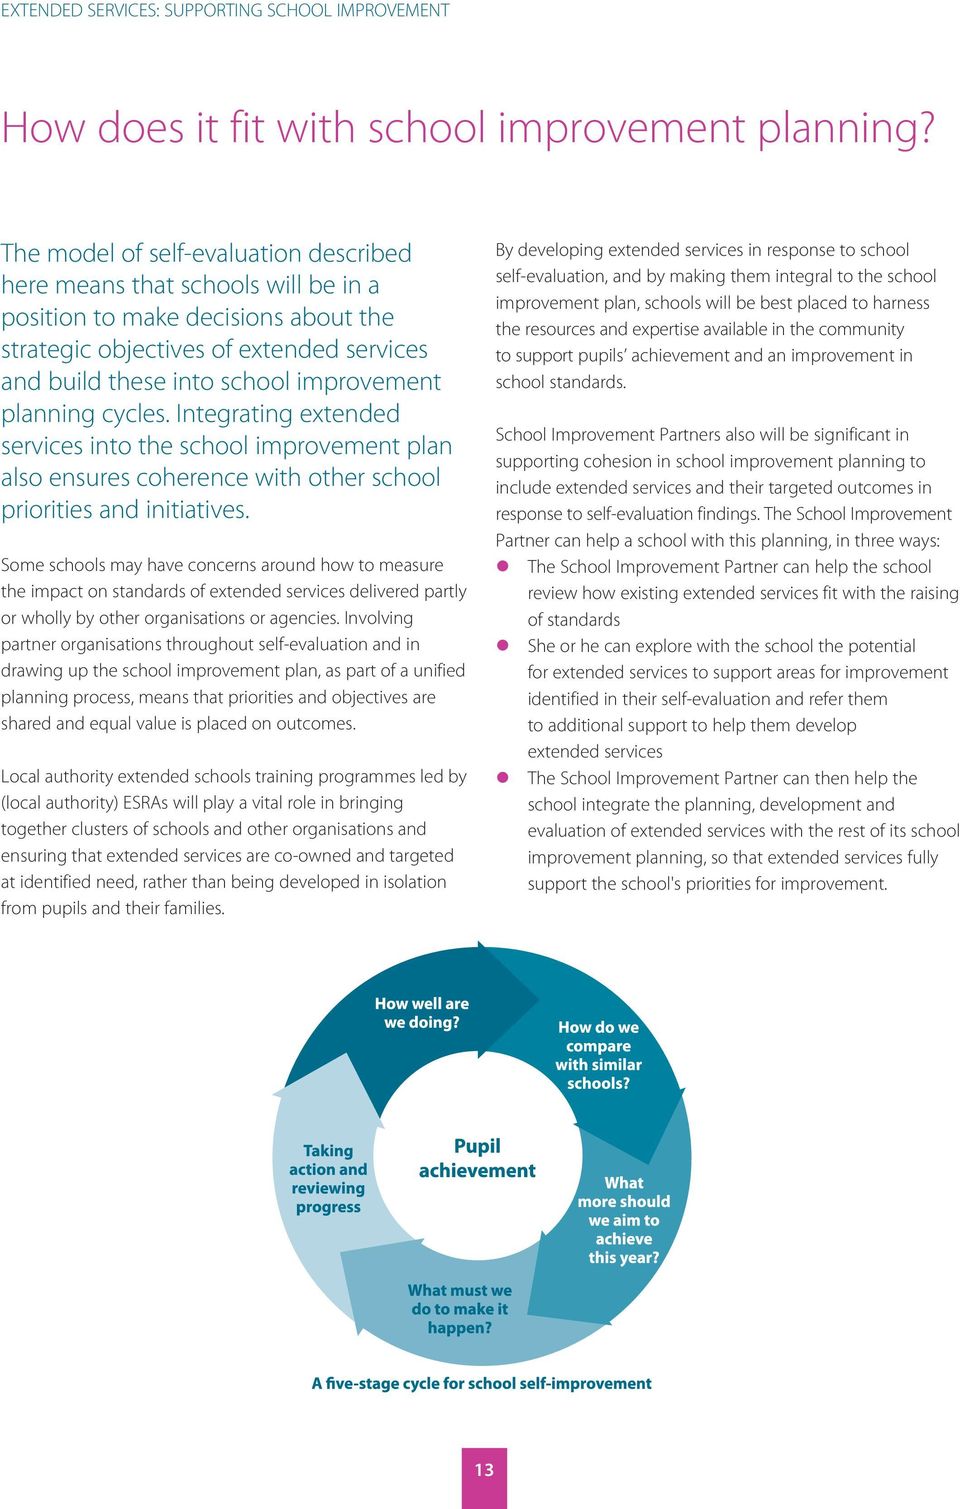 planning cycles. Integrating extended services into the school improvement plan also ensures coherence with other school priorities and initiatives.